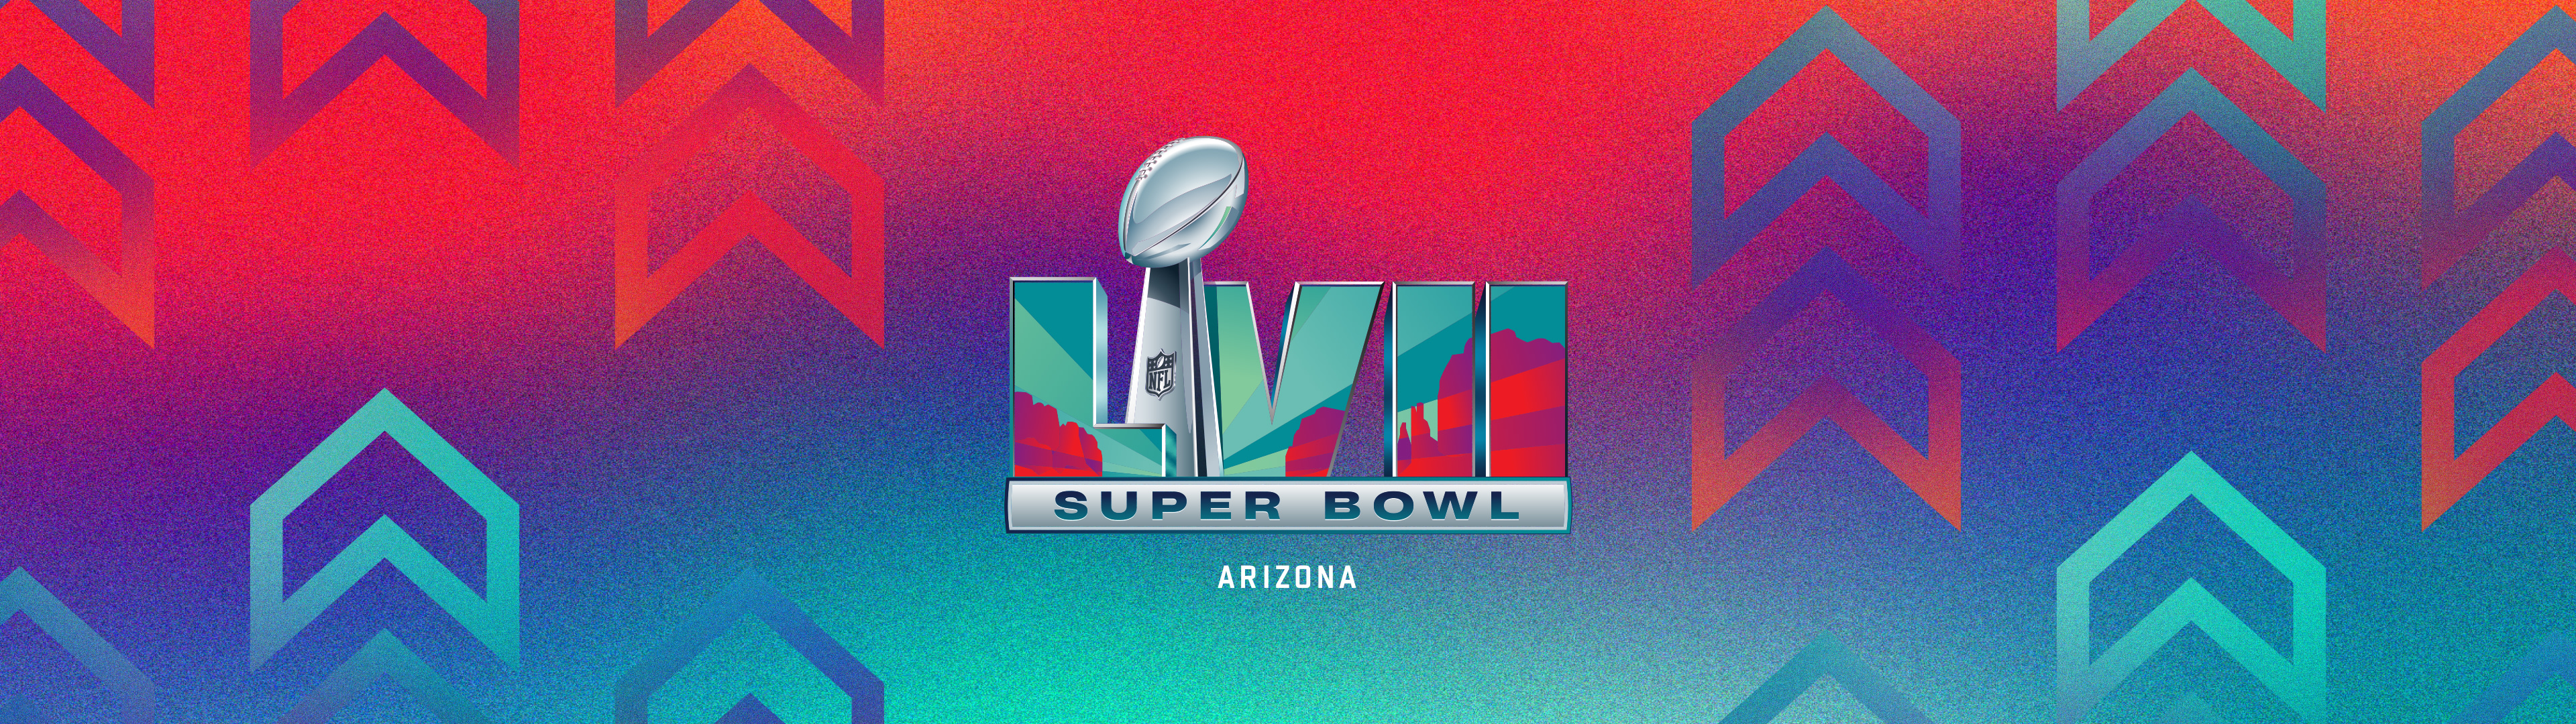 tickets to super bowl 2023